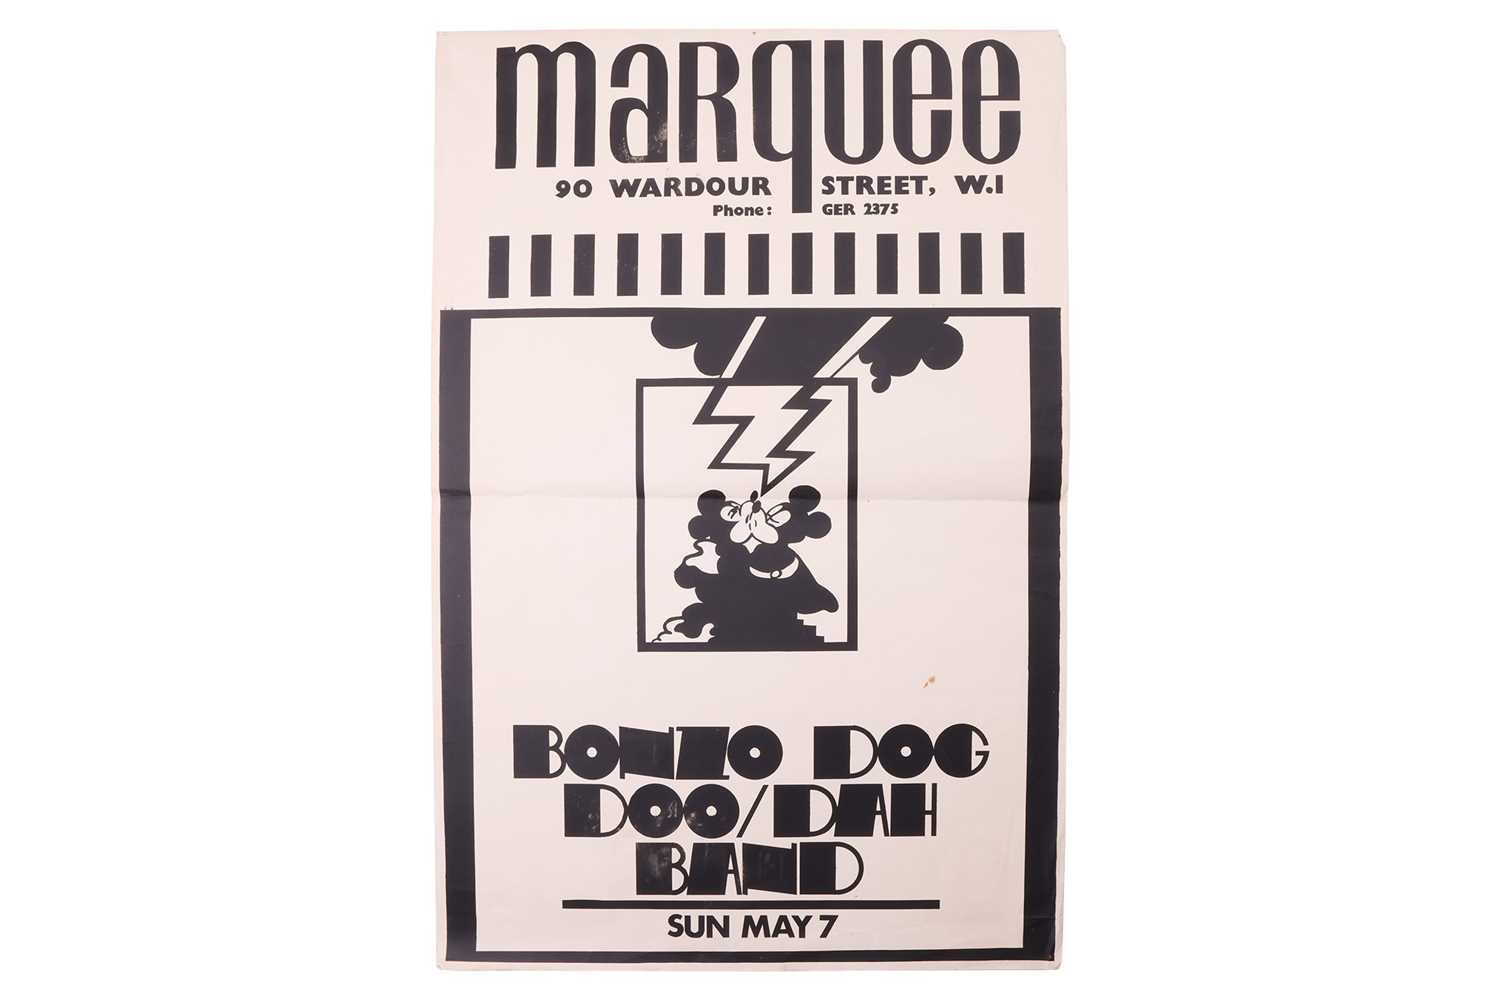 An original monochrome poster from the 1967 Bonzo Dog Doo-Dah Band concert at the Marquee (London),